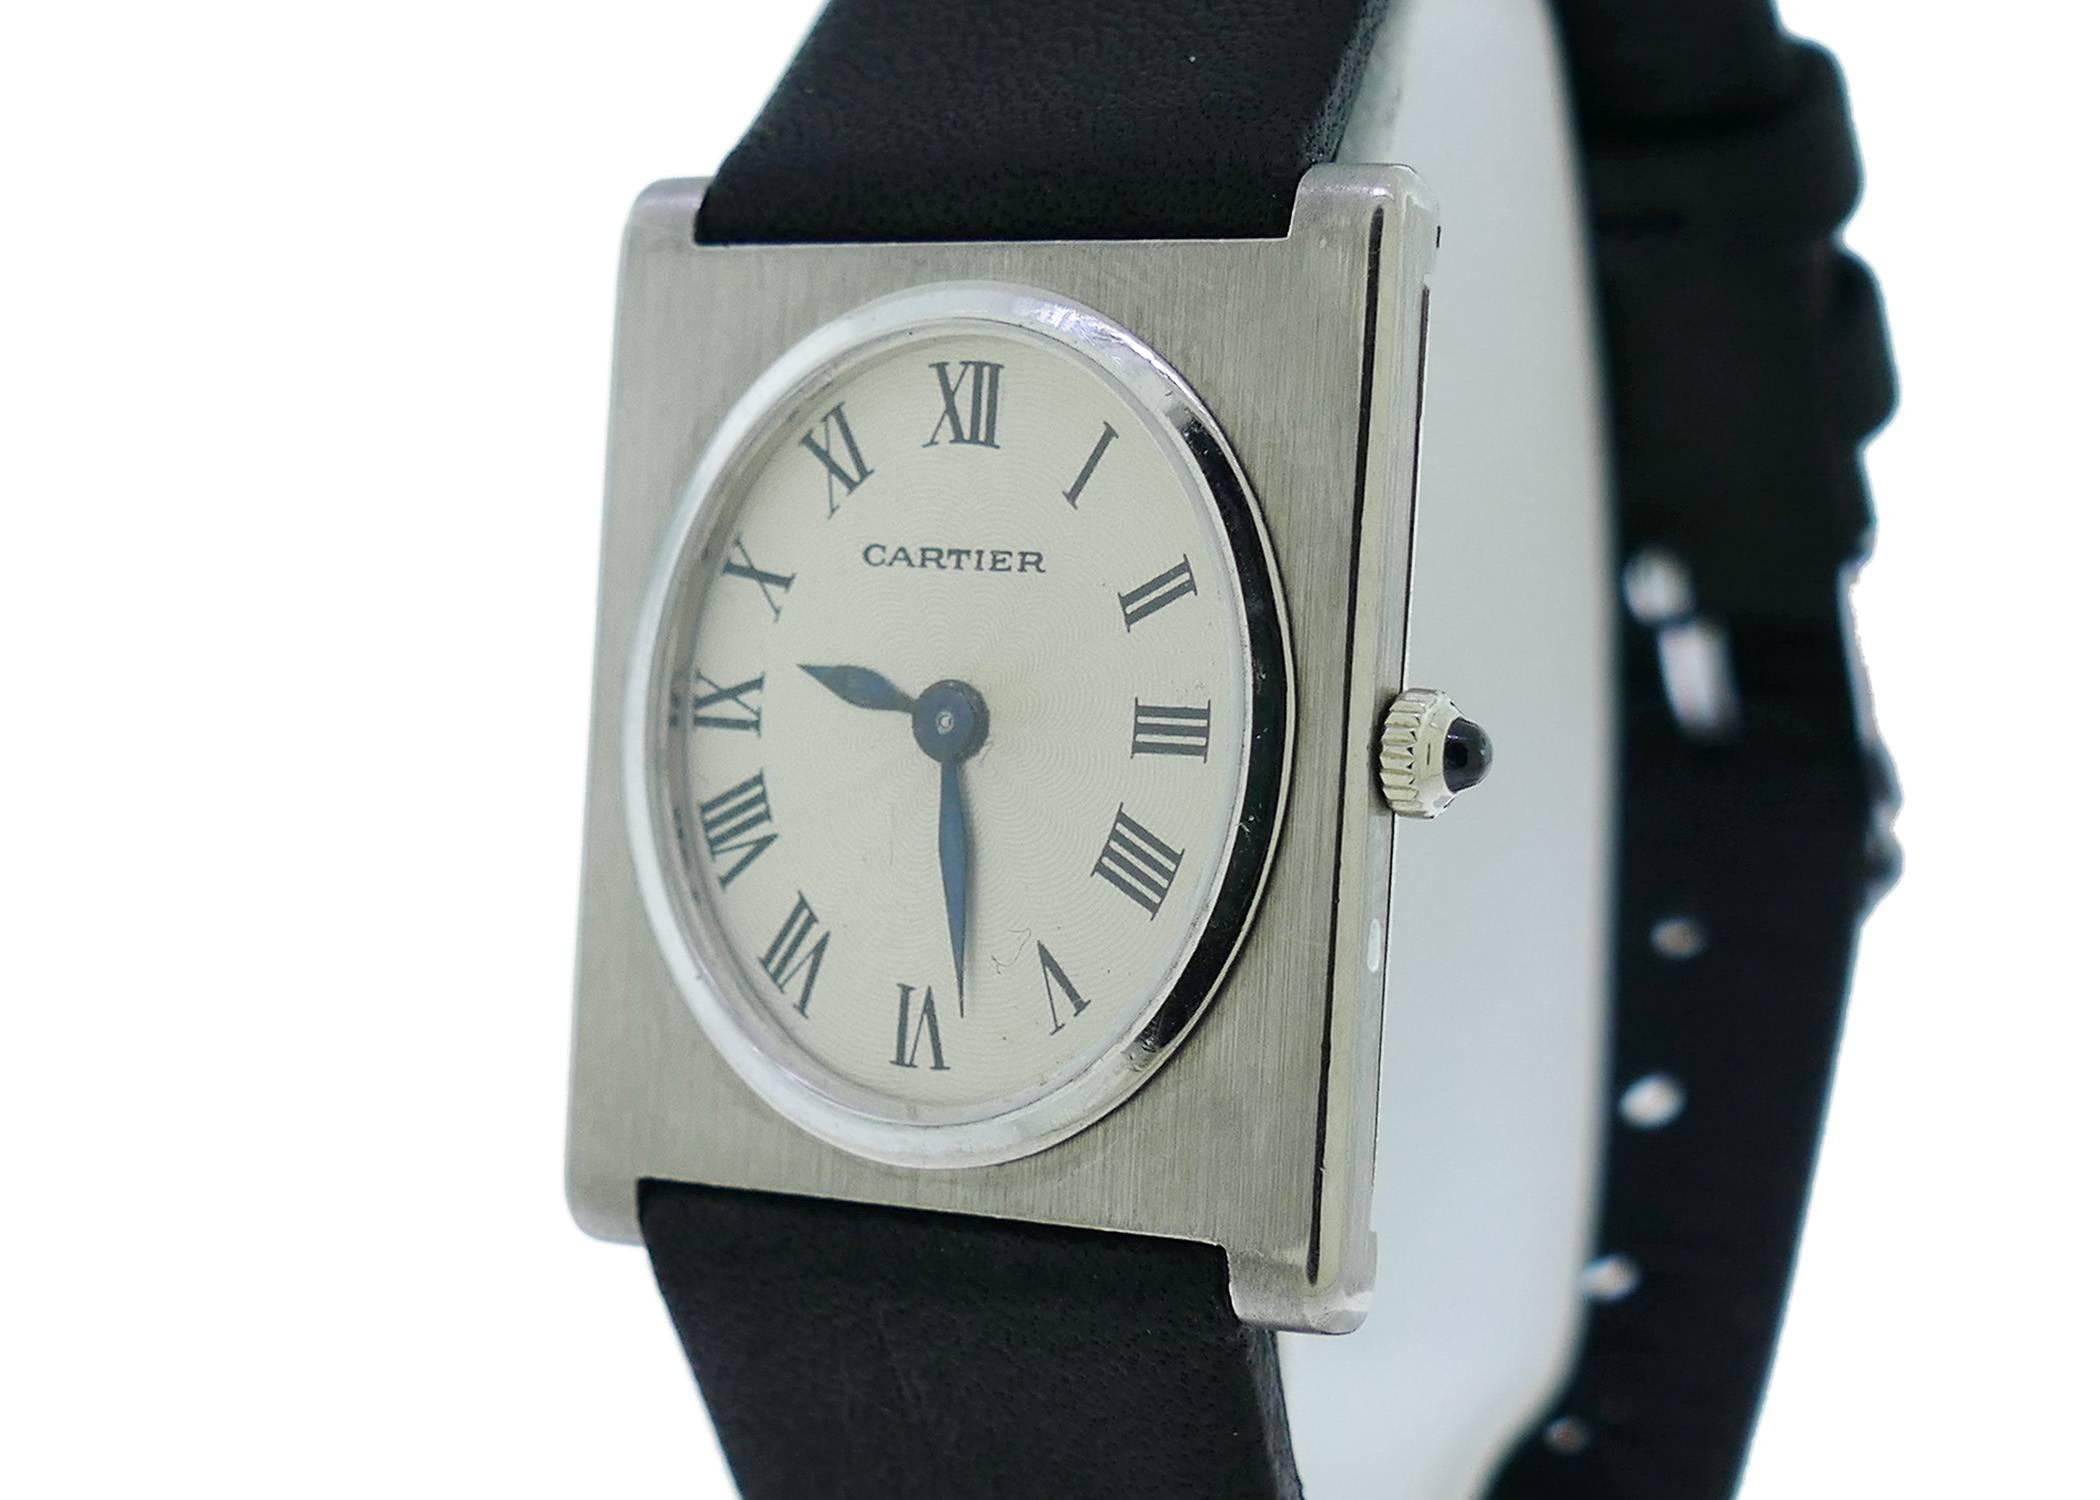 Mens (23x29mm) Vintage Early Cartier / Piaget 18k White Gold Unusual Watch . The Watch is in Great Condition & Keeping Great Time, Movement is Operated by Mechanical Hand Winding. The Watch is on a Generic Strap & Buckle. 